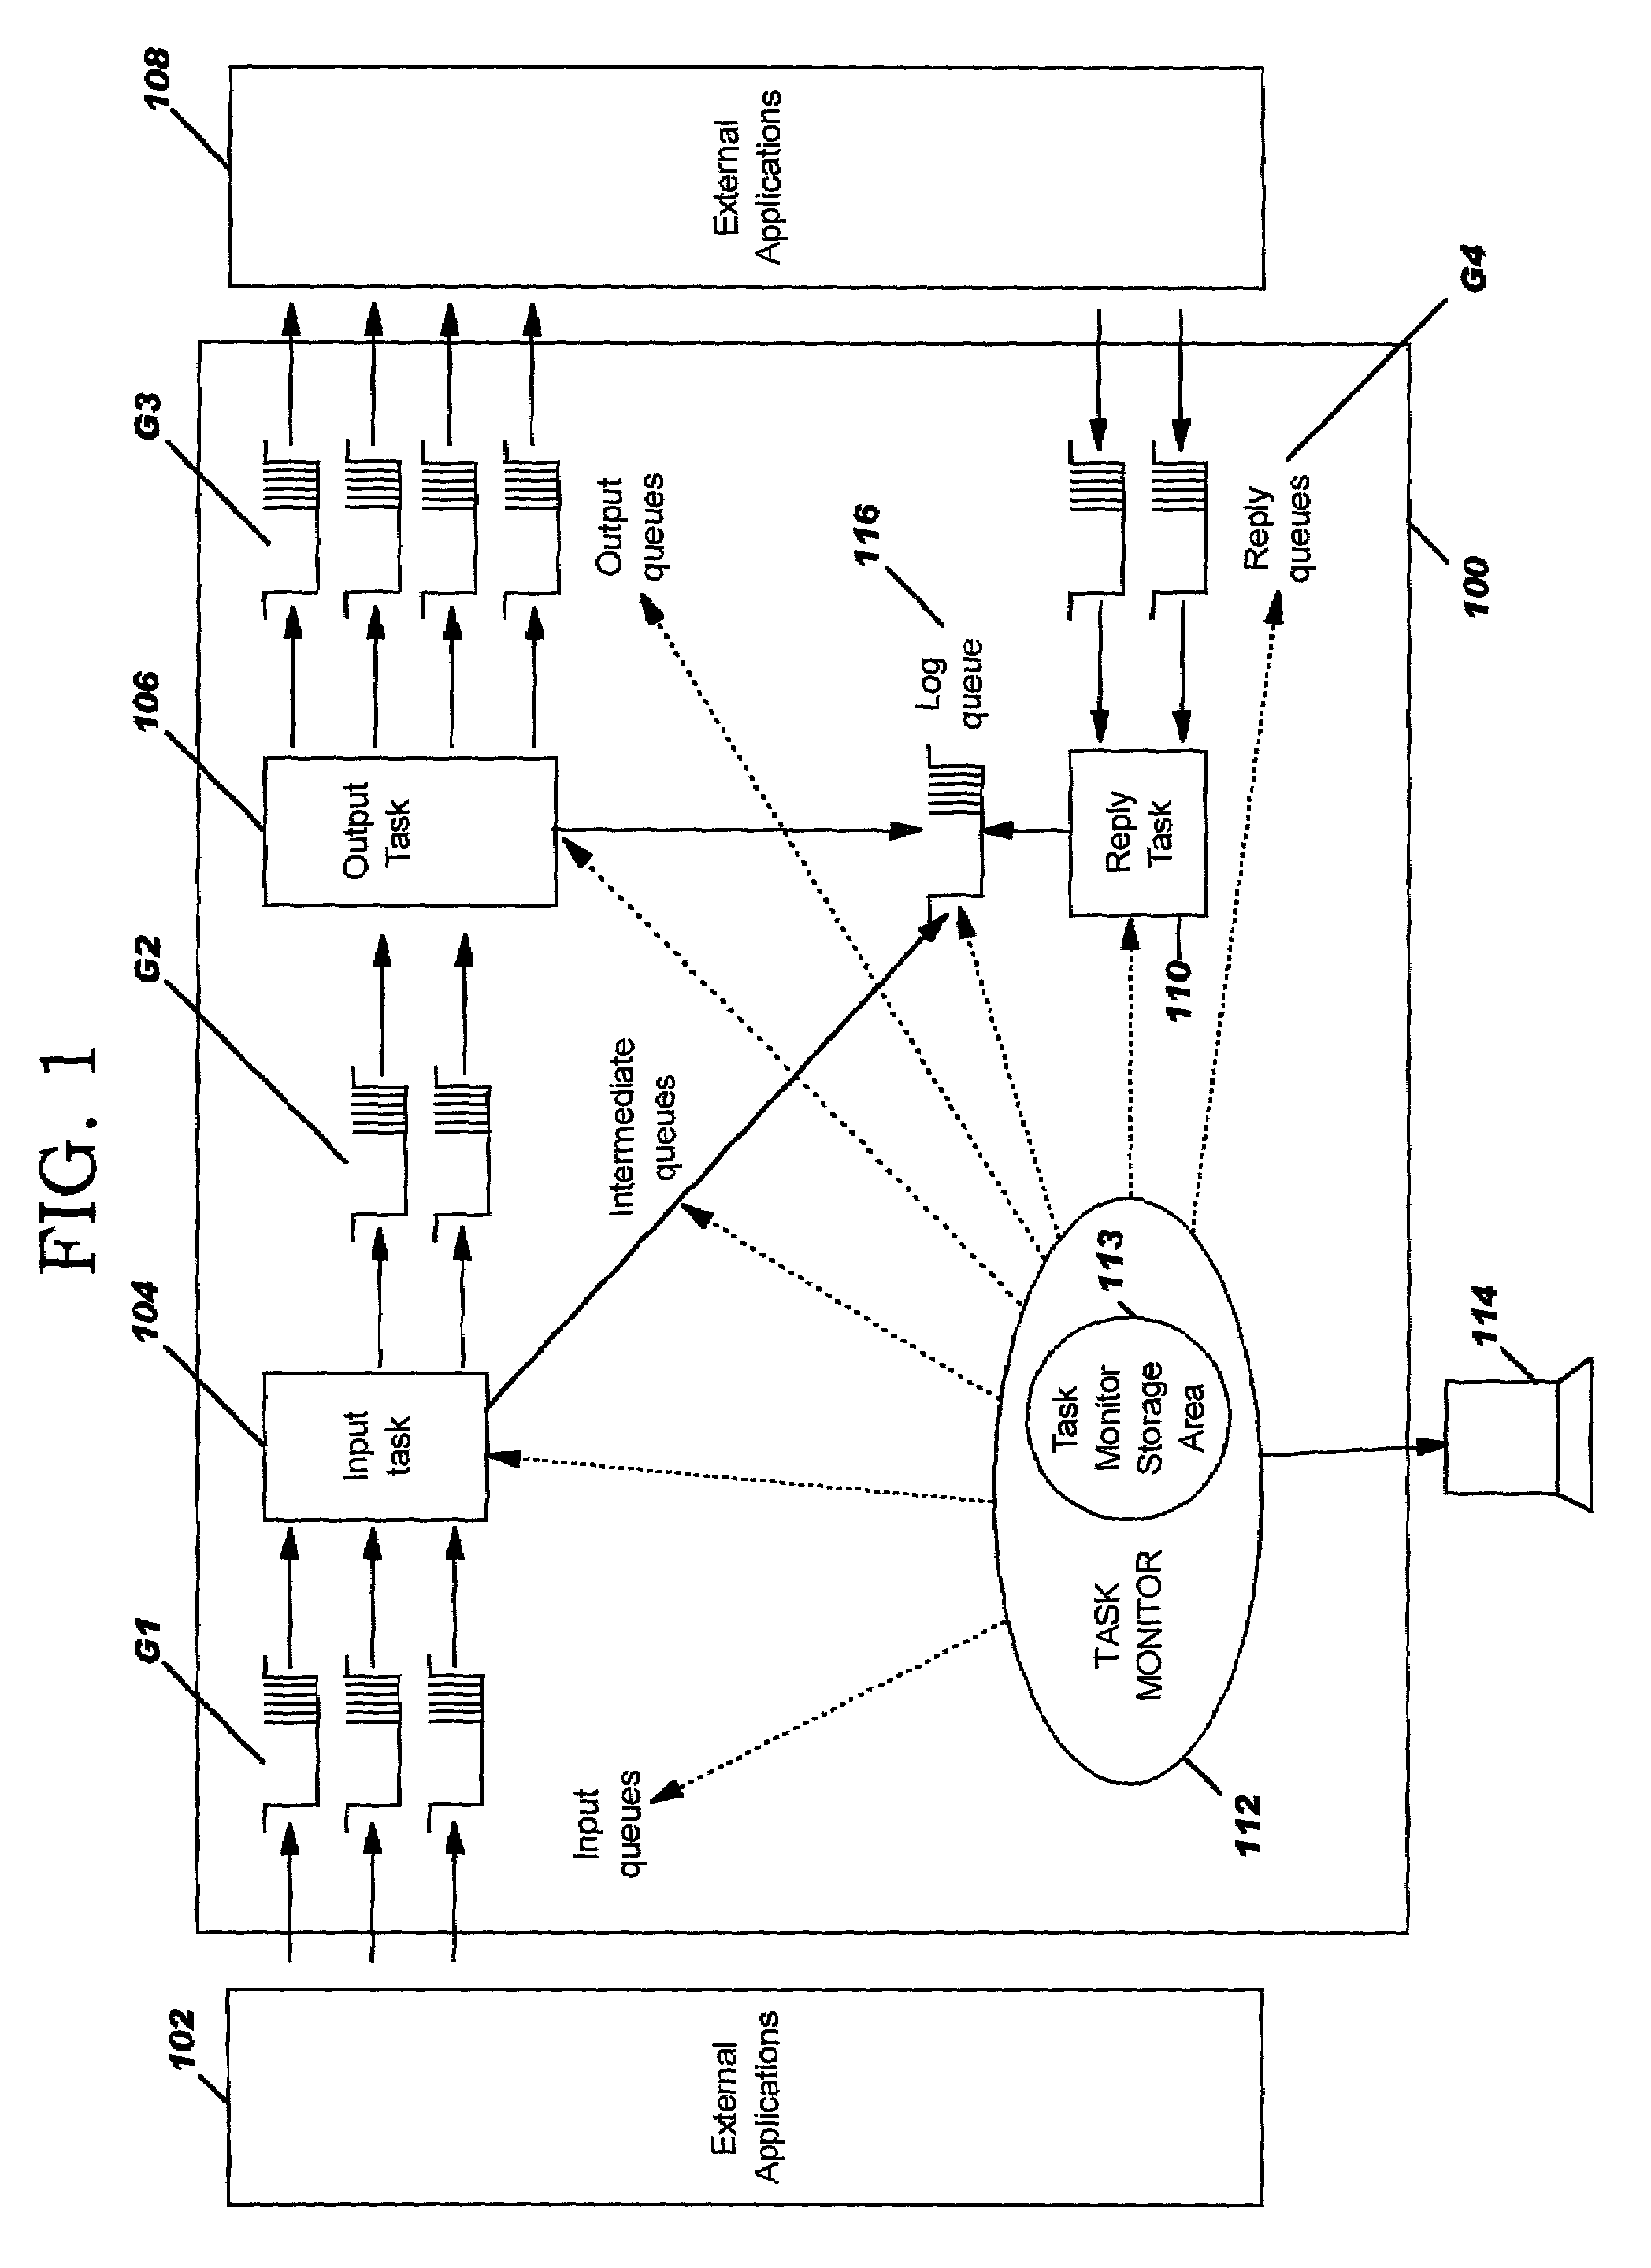 System and method for monitoring software queuing applications